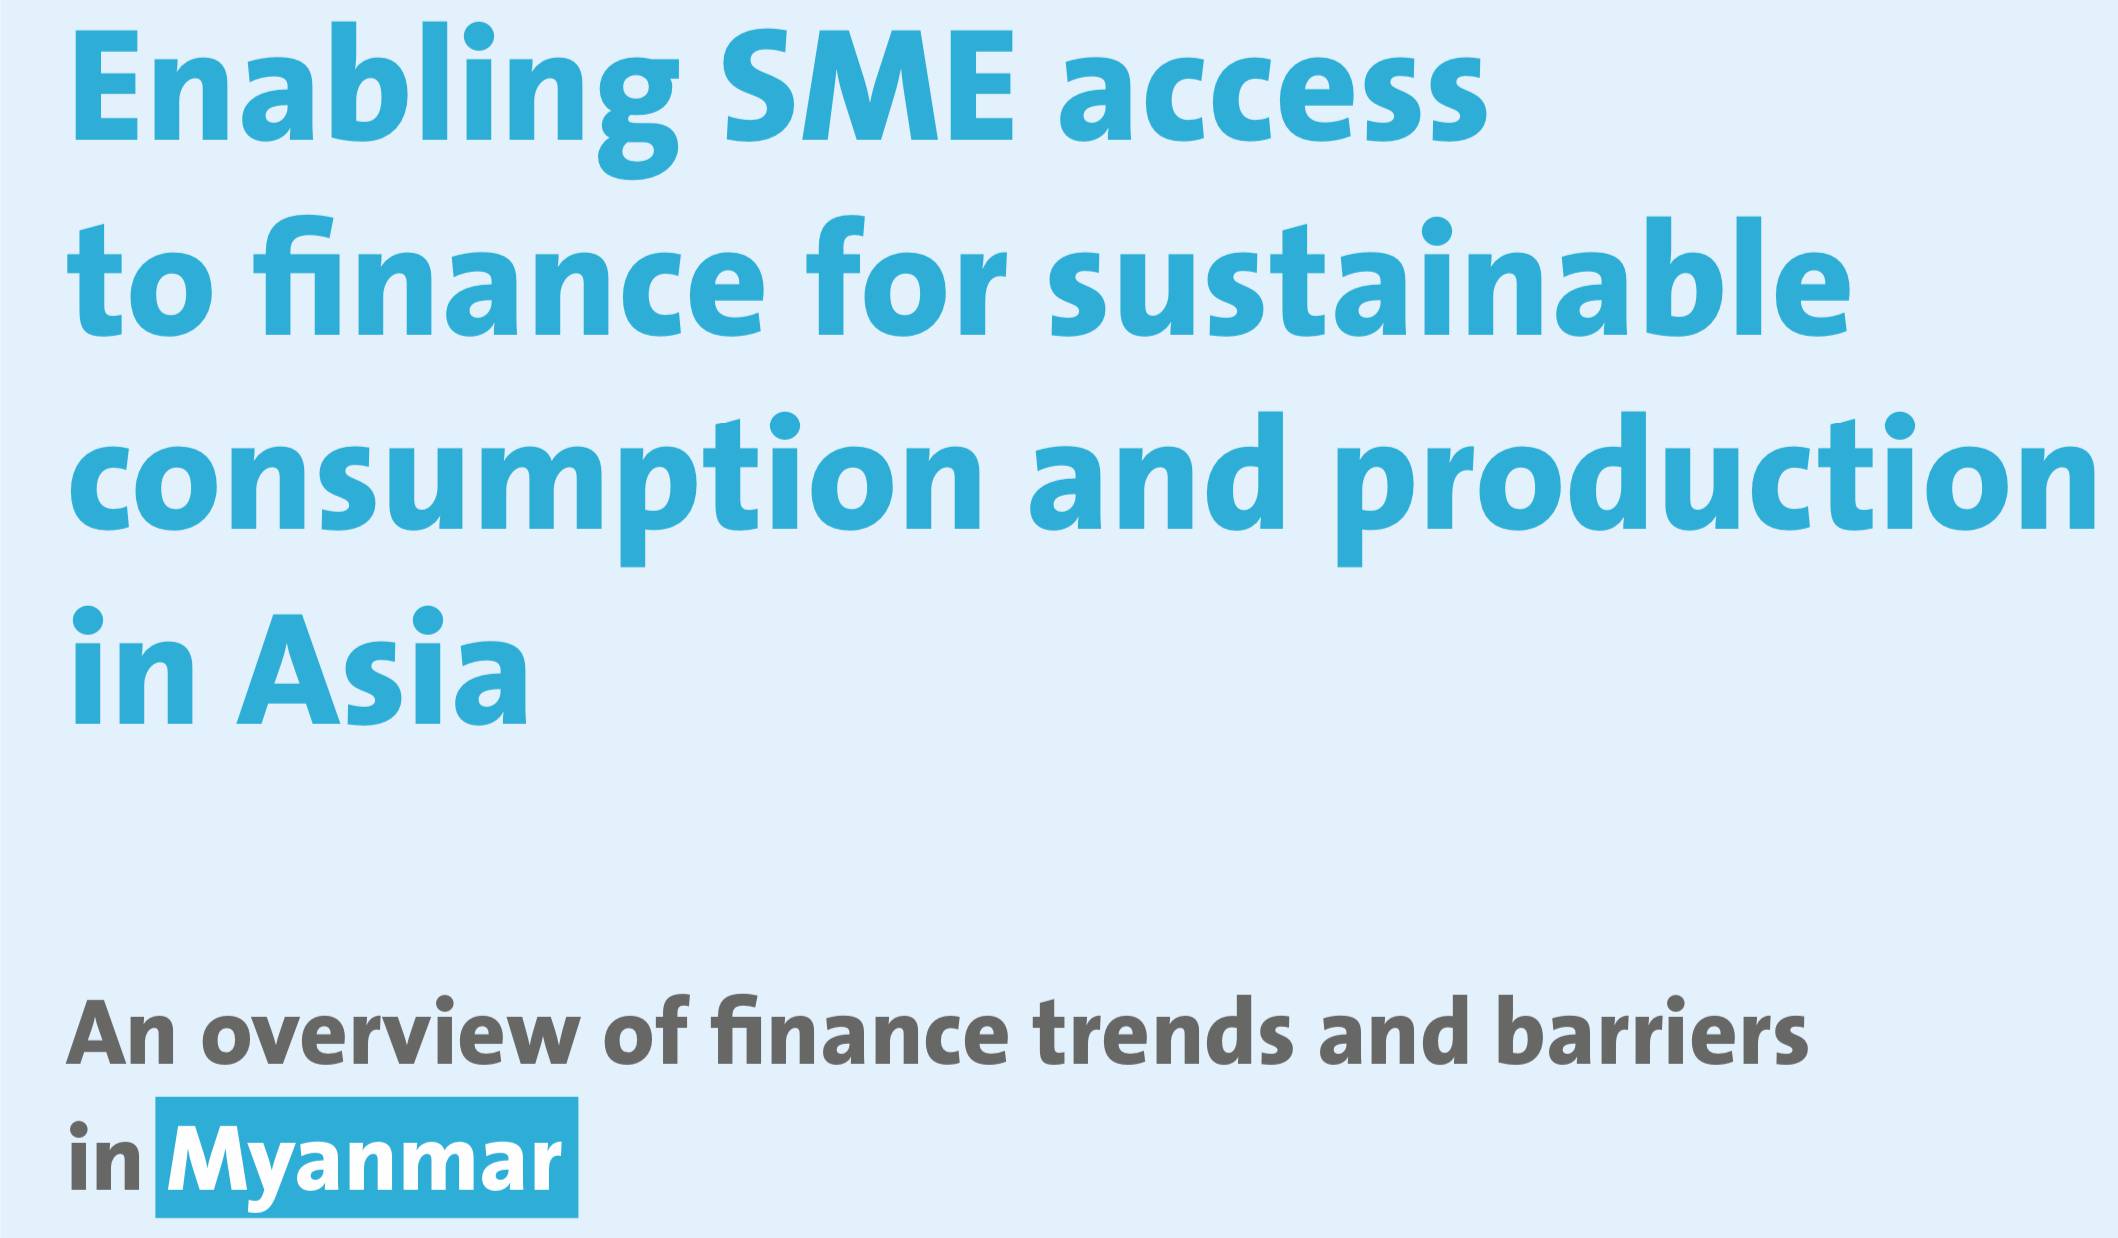 Enabling SME access to finance for sustainable consumption and production in Asia: An overview of finance trends and barriers in Myanmar